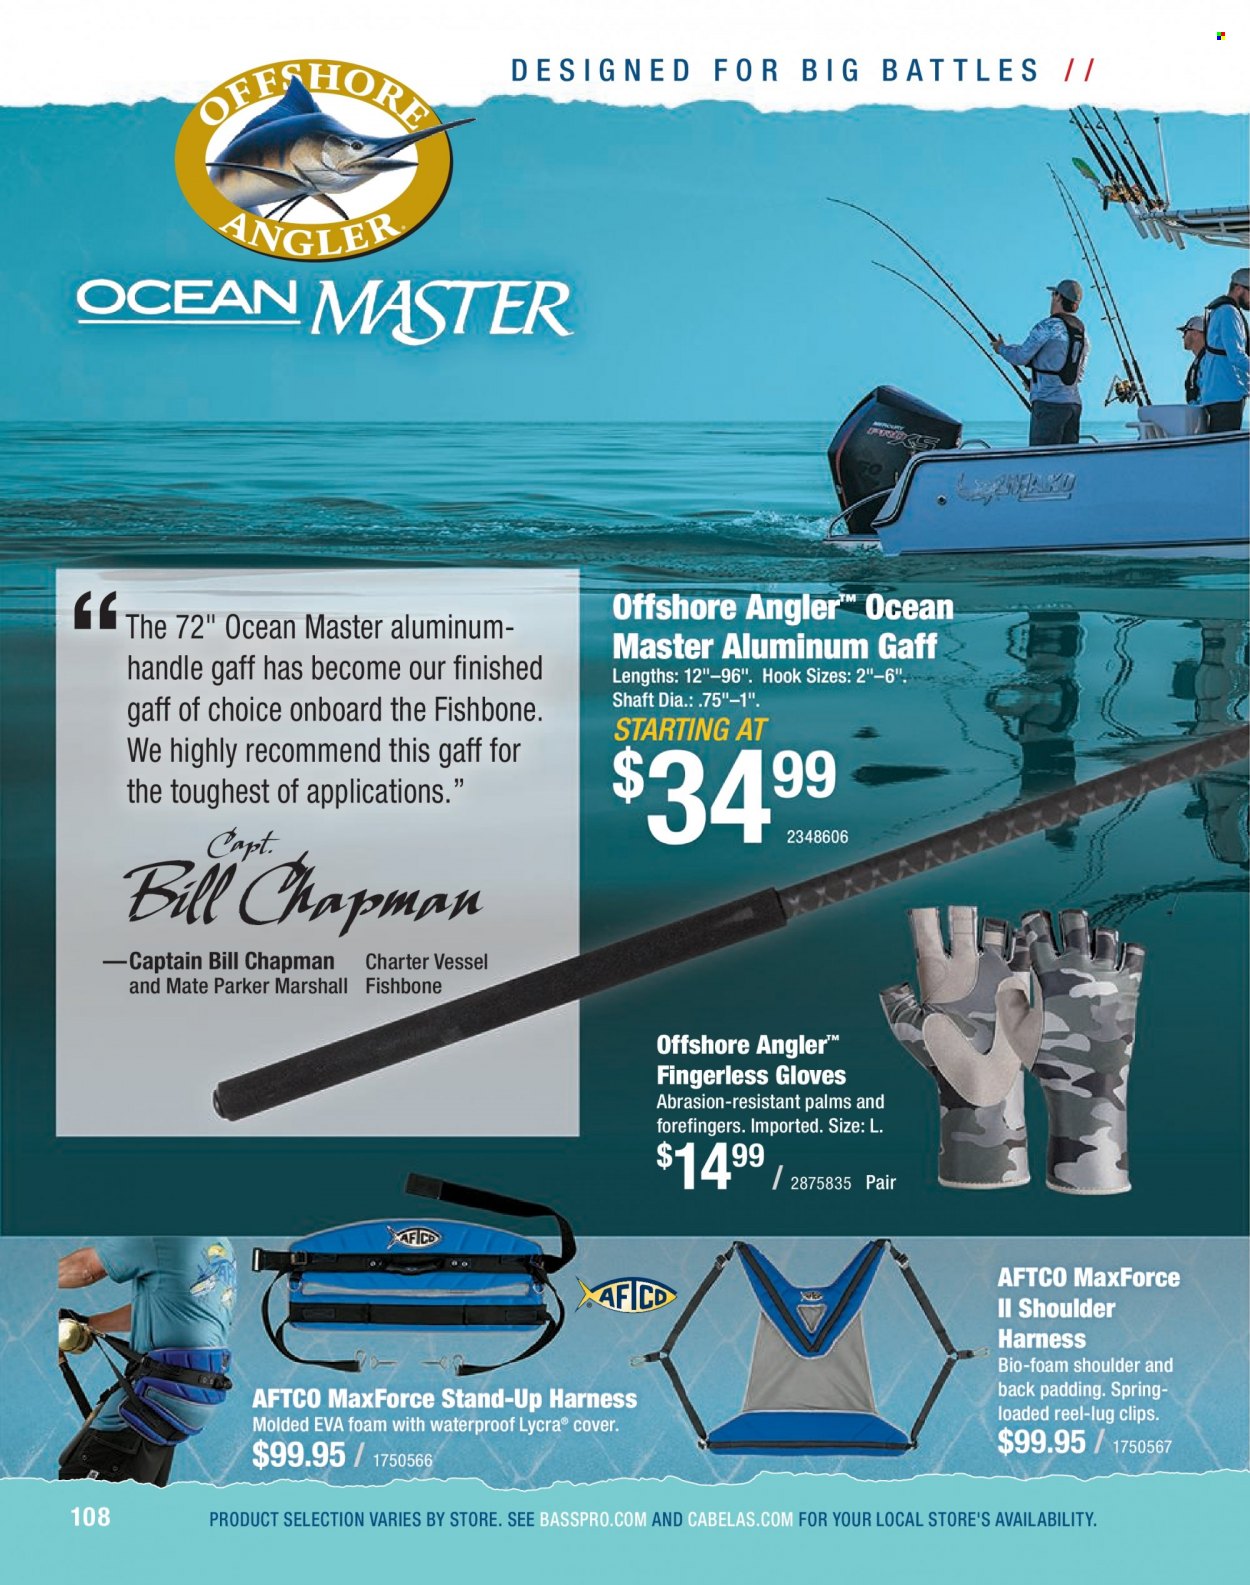 Bass Pro Shops Flyer - Sales products - Marshall, gloves, reel, palm. Page 108.